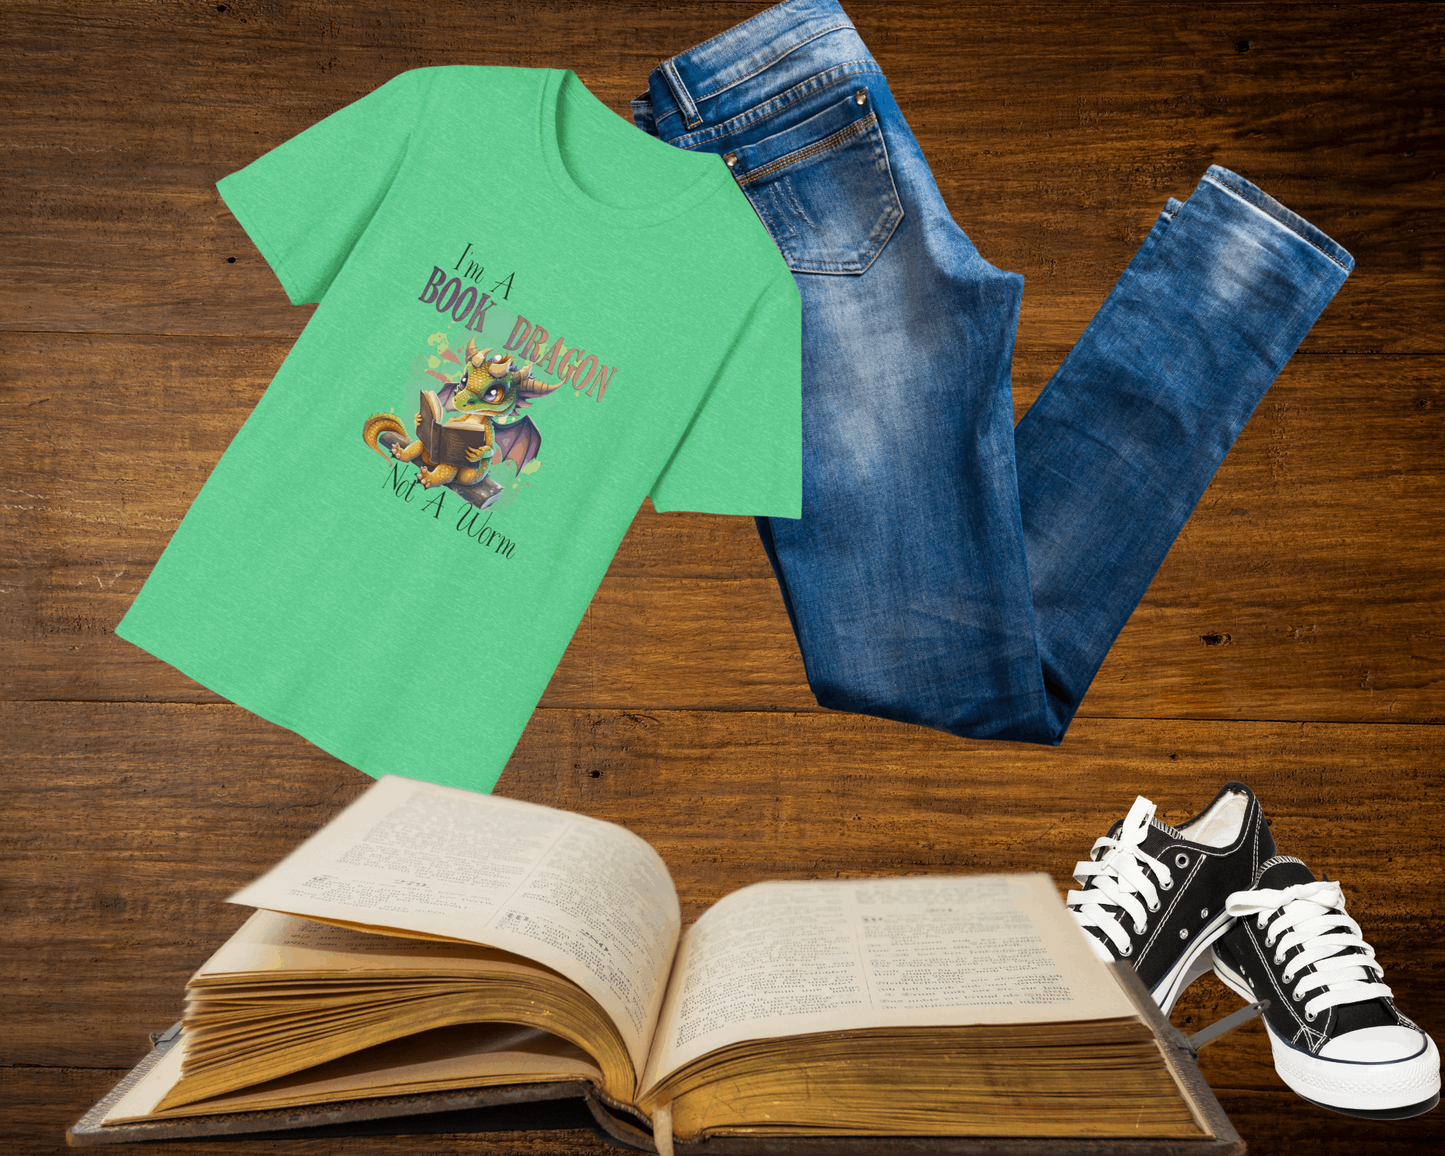 I'm A Book Dragon Not A Book Worm T-shirt-Unisex Softstyle T-Shirt